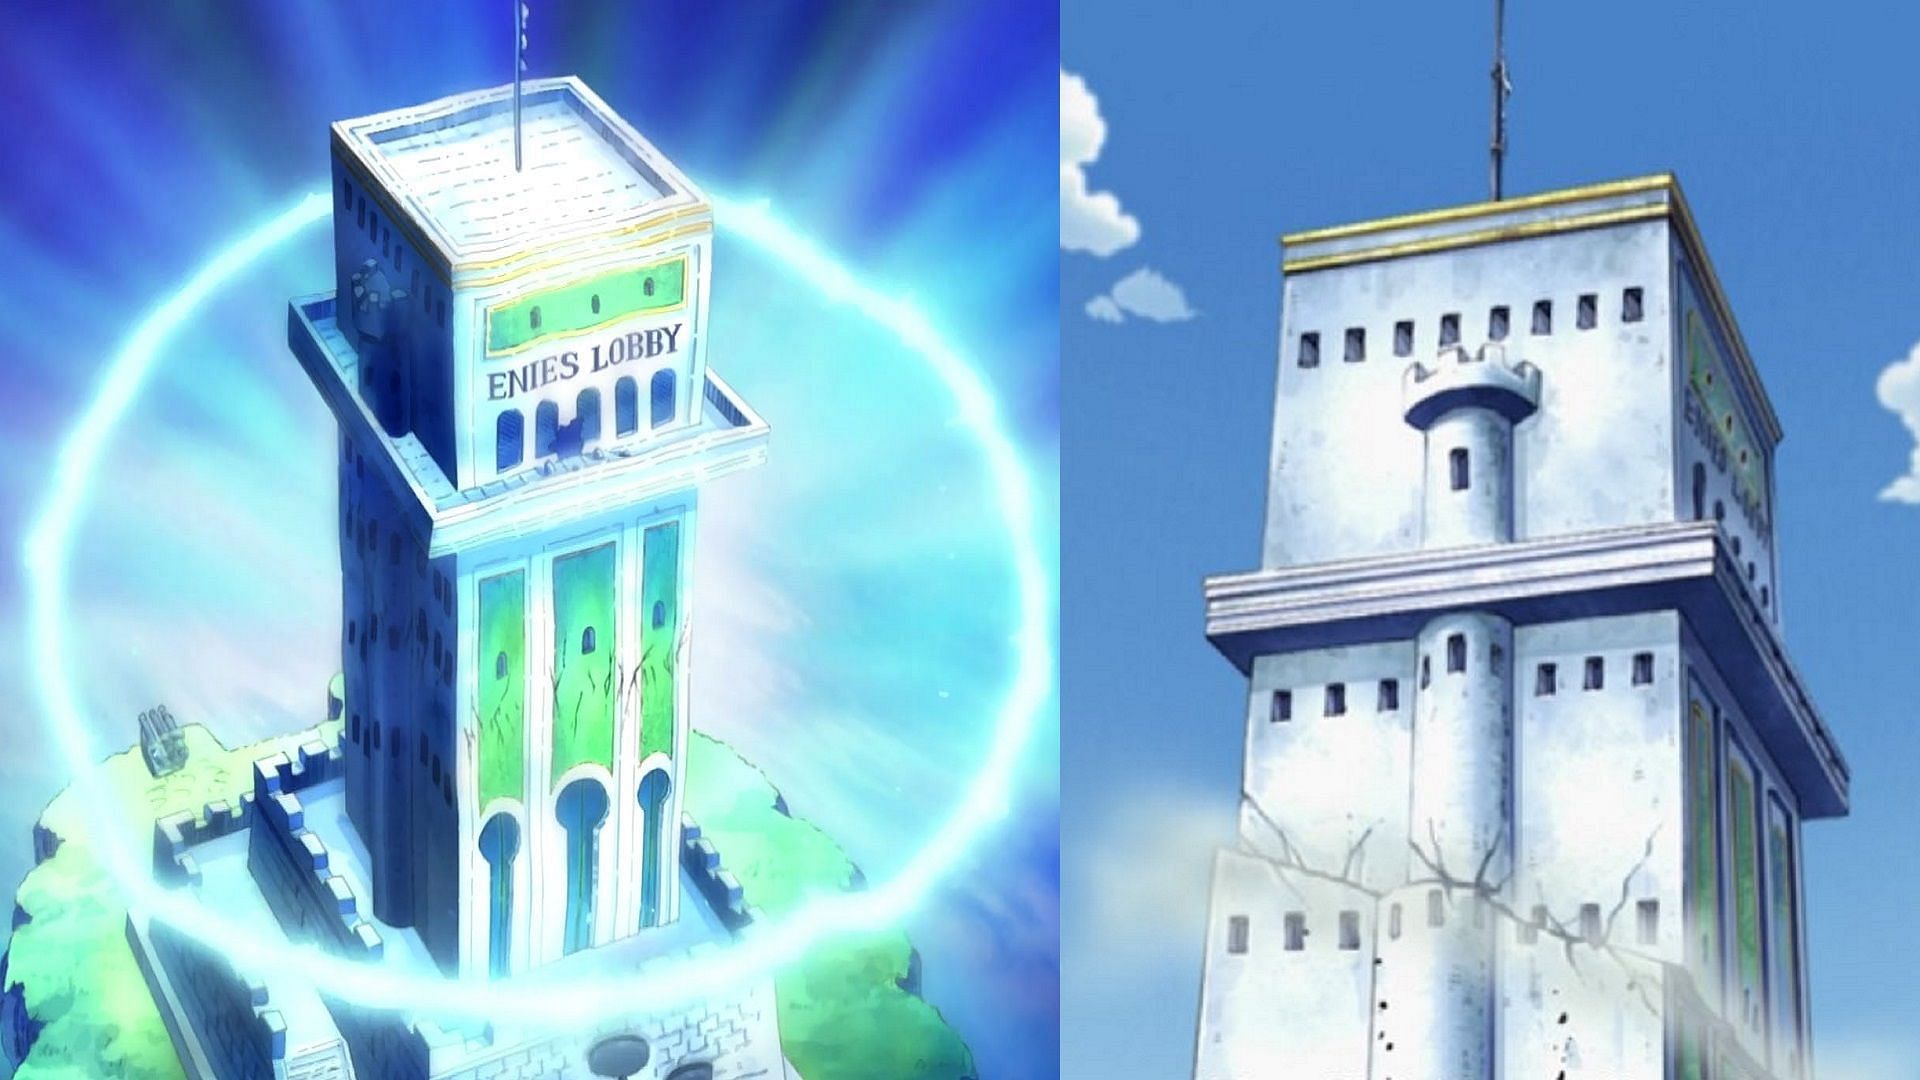 Despite a small gap between their Doriki, there is a remarkable gap in overall power between Kaku and Jabra (Image via Toei Animation, One Piece)